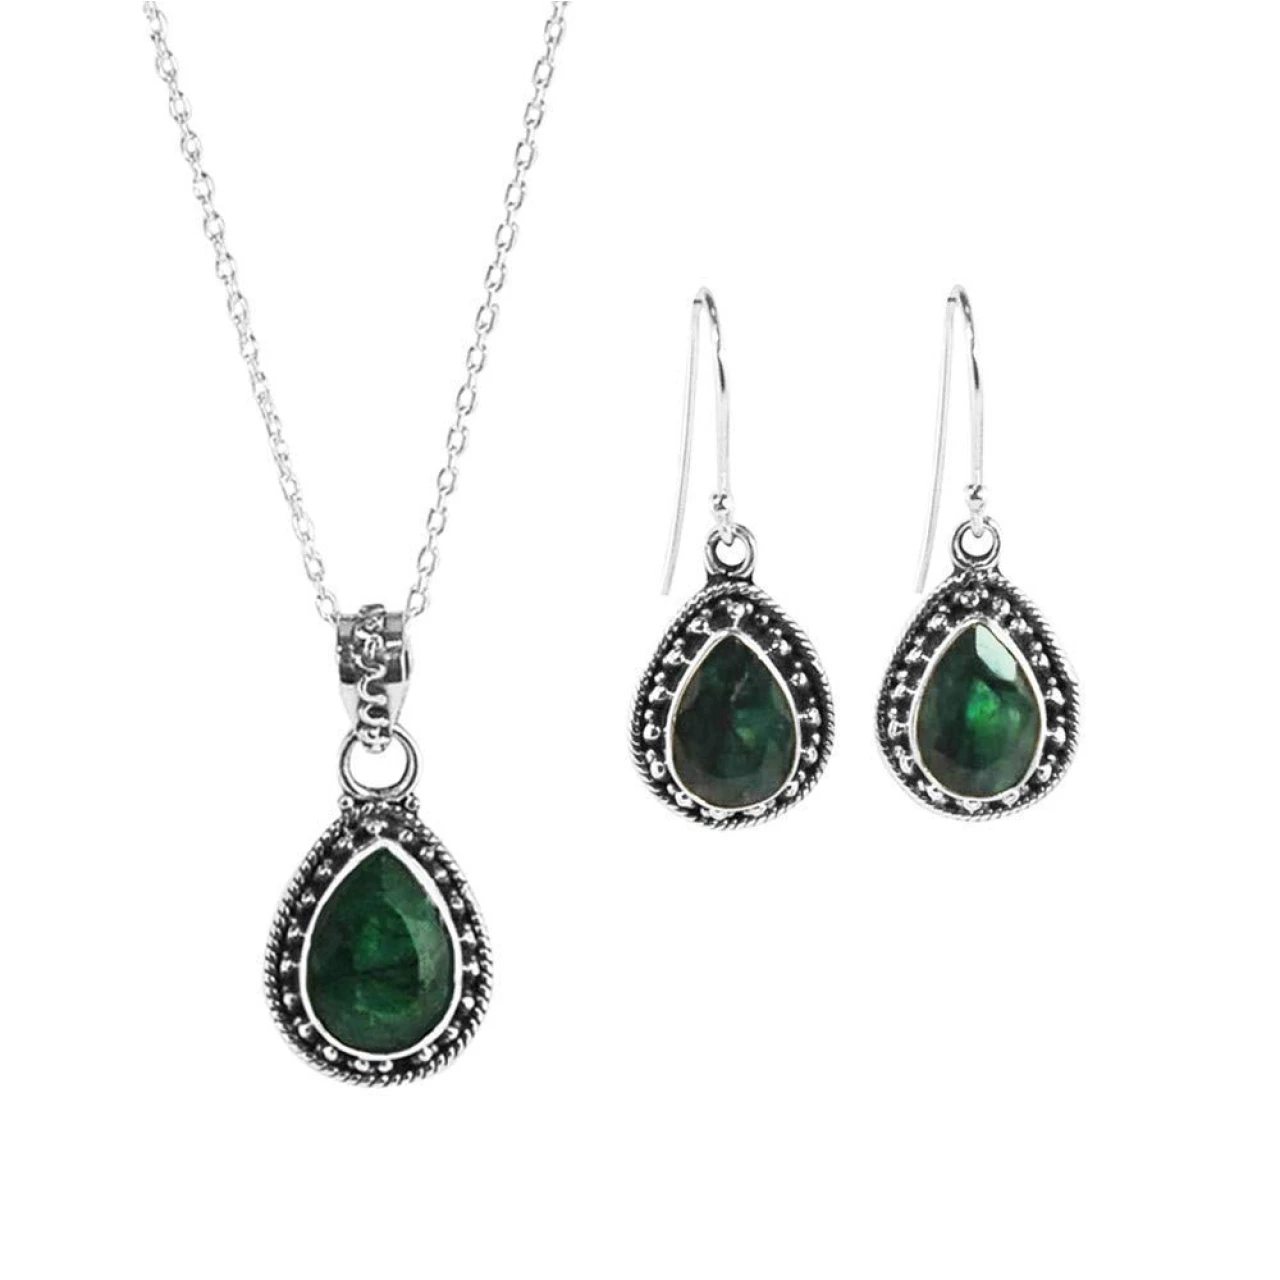 Sivalya AMALFI Raw Emerald Necklace and Earring Set in Solid Silver